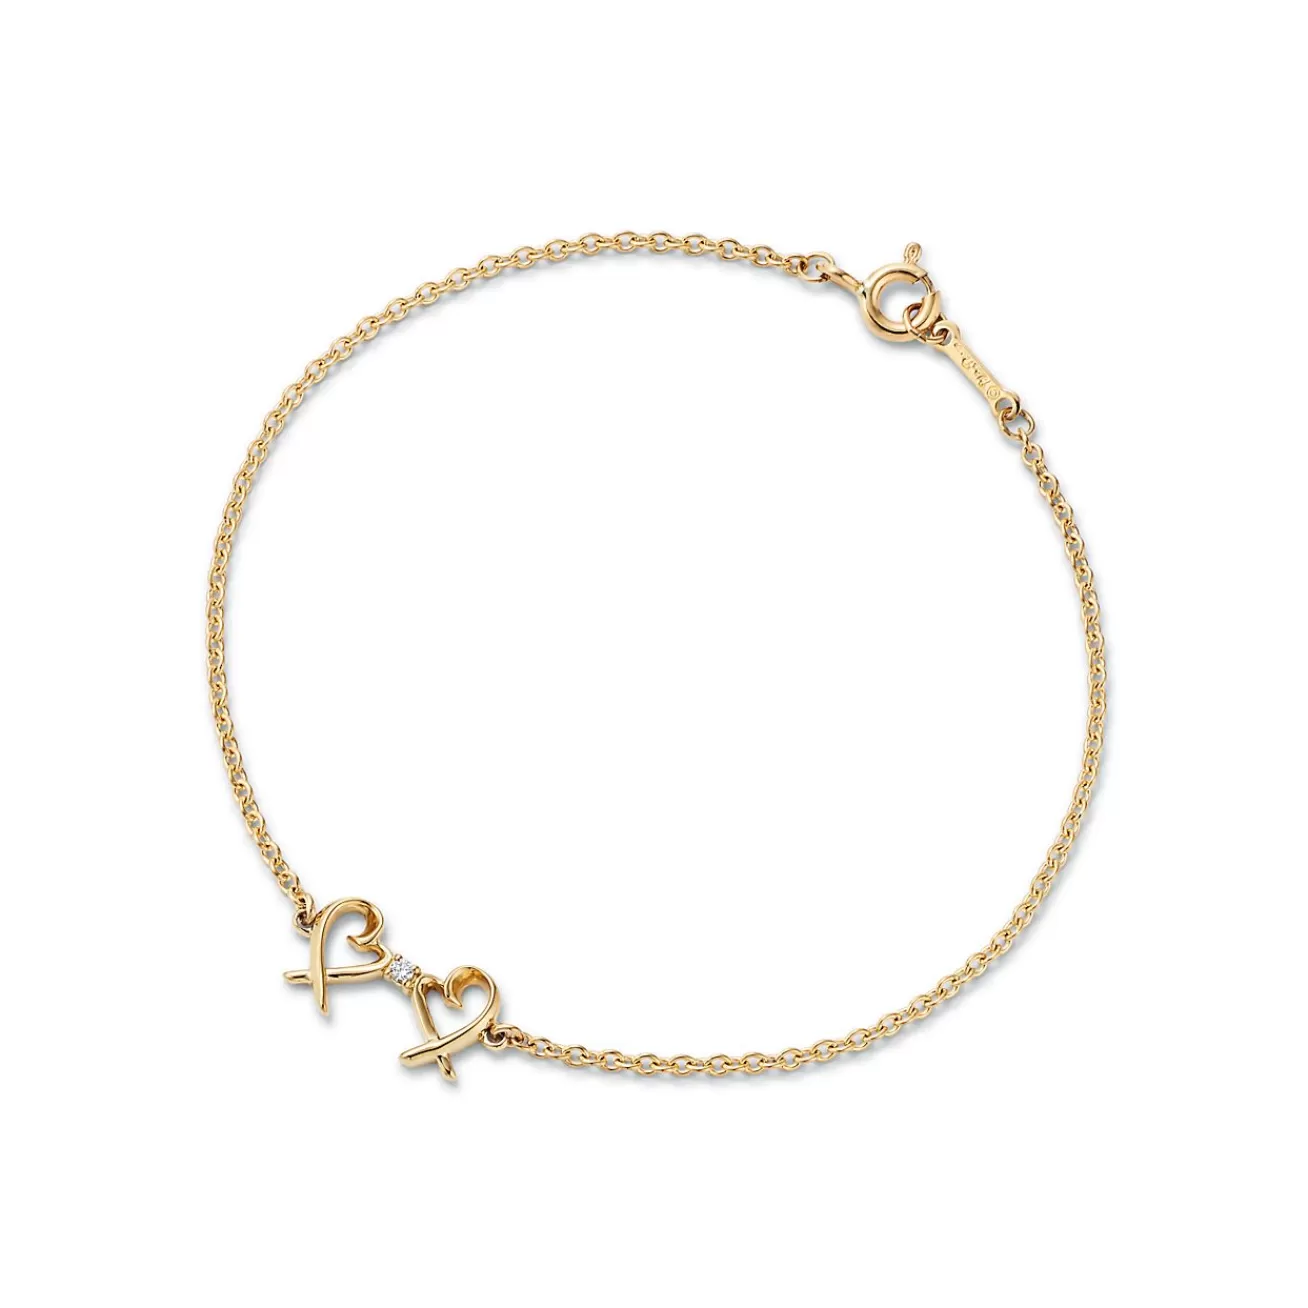 Tiffany & Co. Paloma Picasso® Double Loving Heart bracelet in 18k gold with diamonds, medium. | ^ Bracelets | Gifts for Her